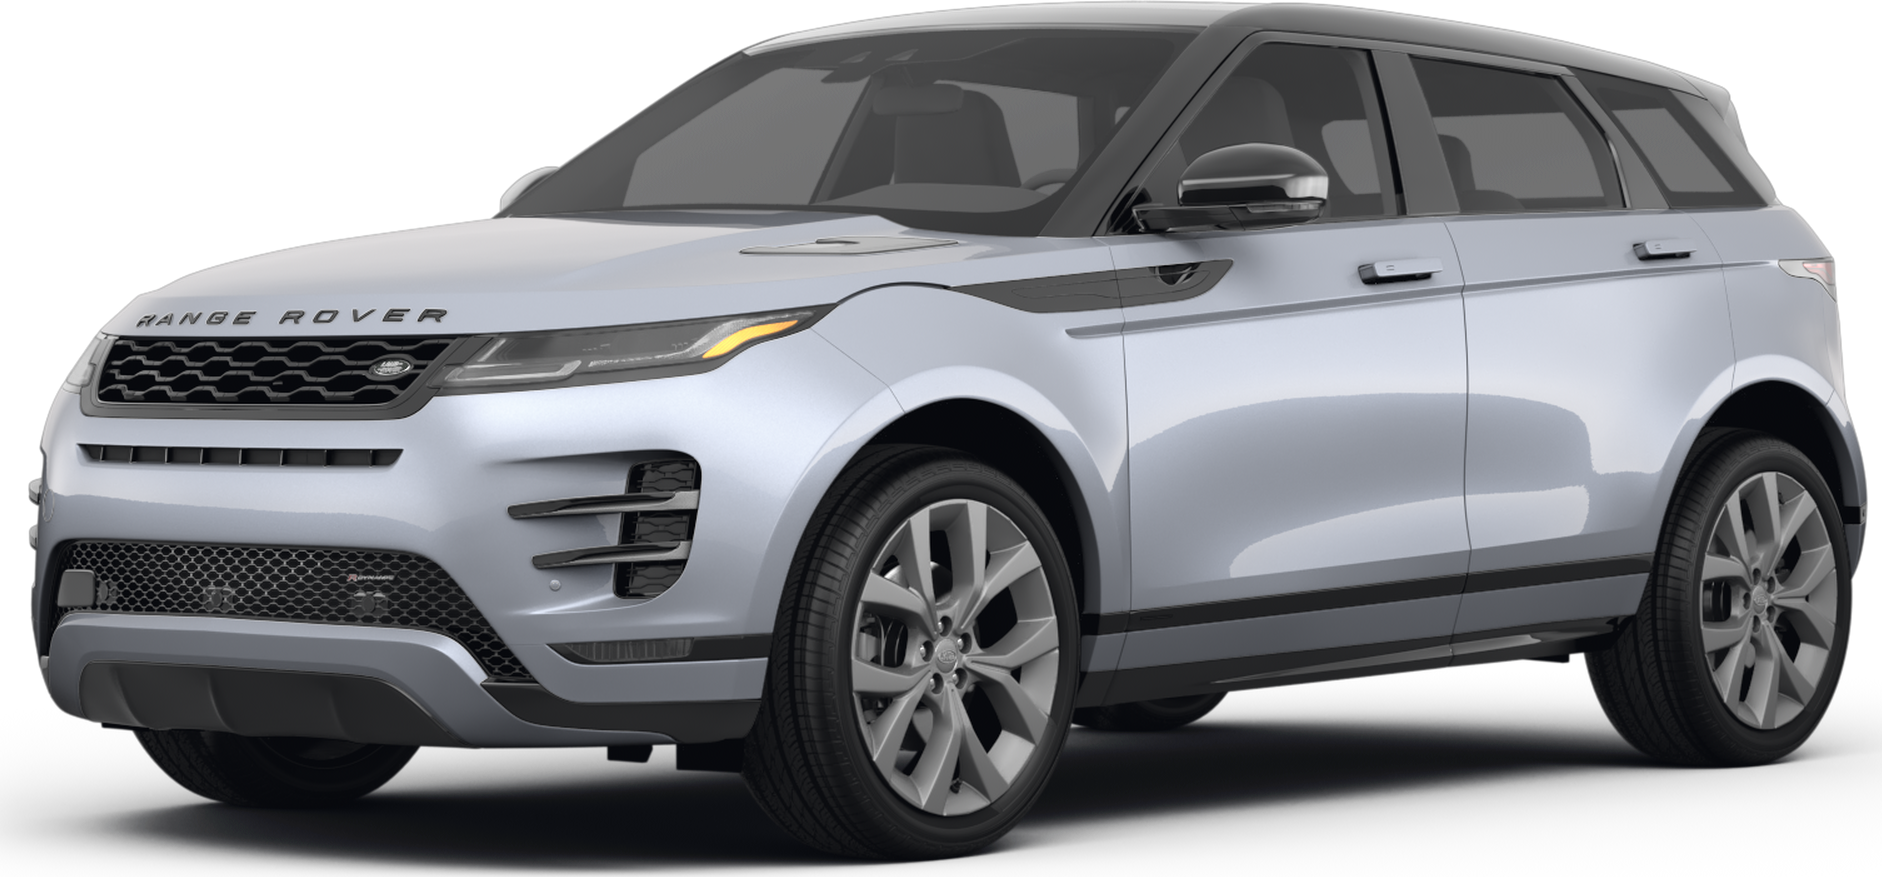 2022 Land Rover Range Rover Evoque Specs and Features